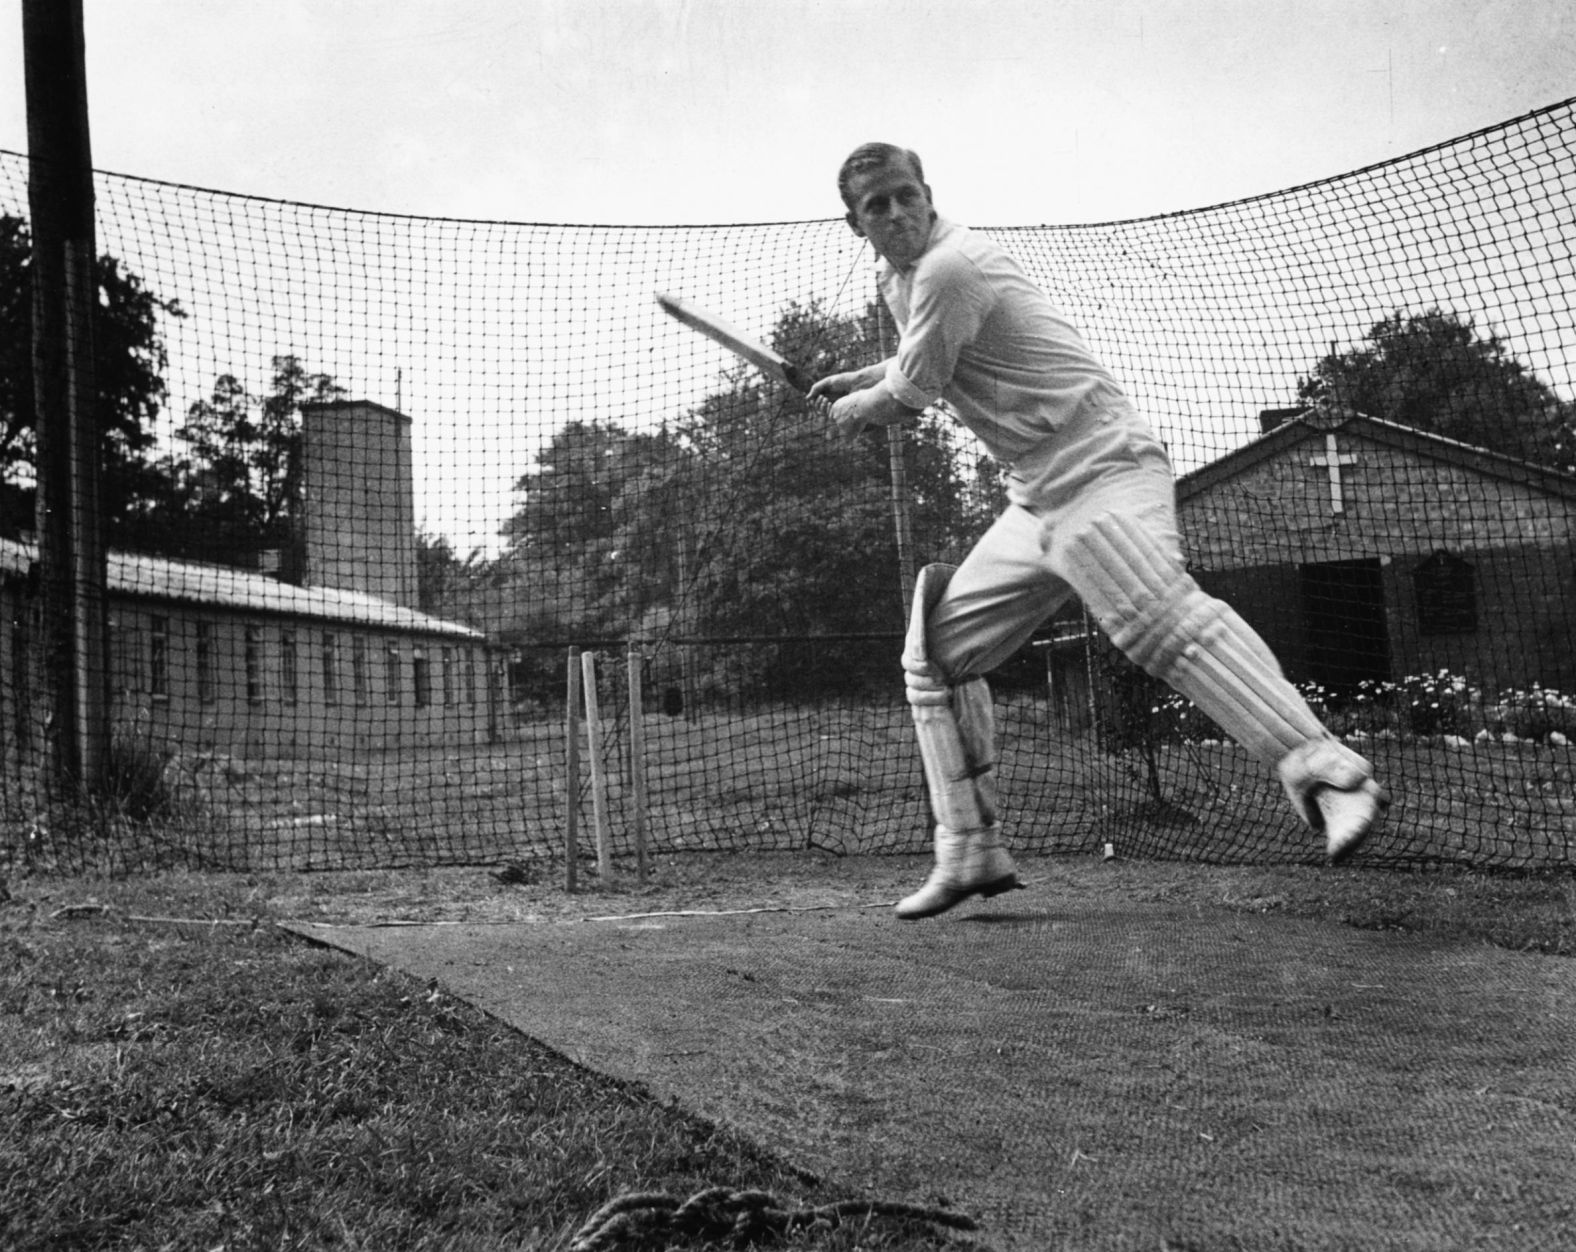 Prince Philip practices cricket while in the Royal Navy in 1947.